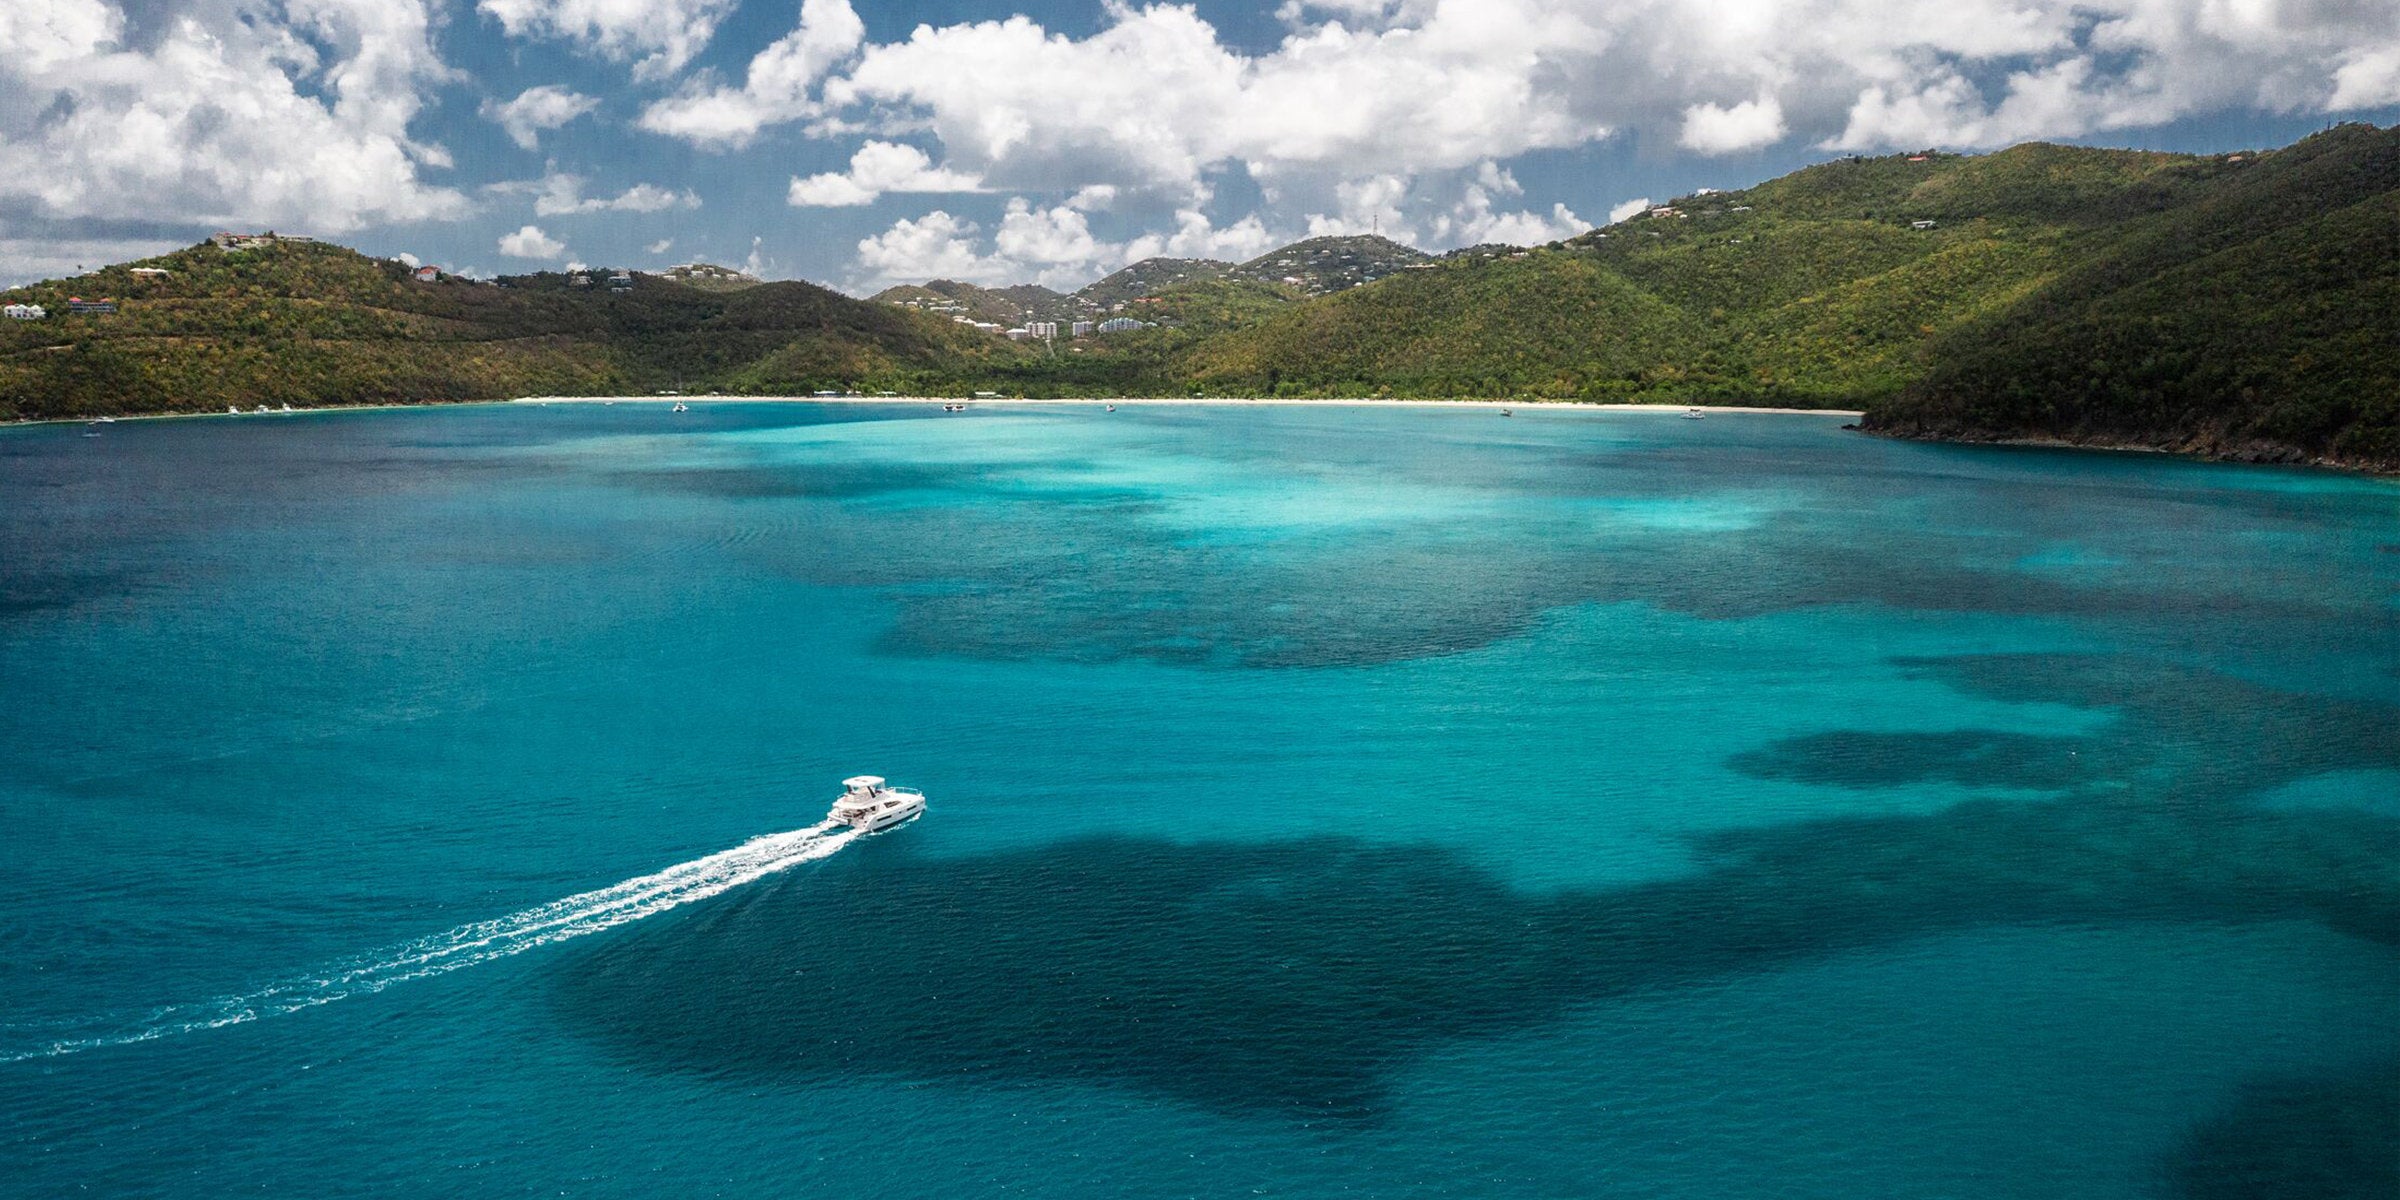 Drone view of power yacht in Magens Bay, USVI